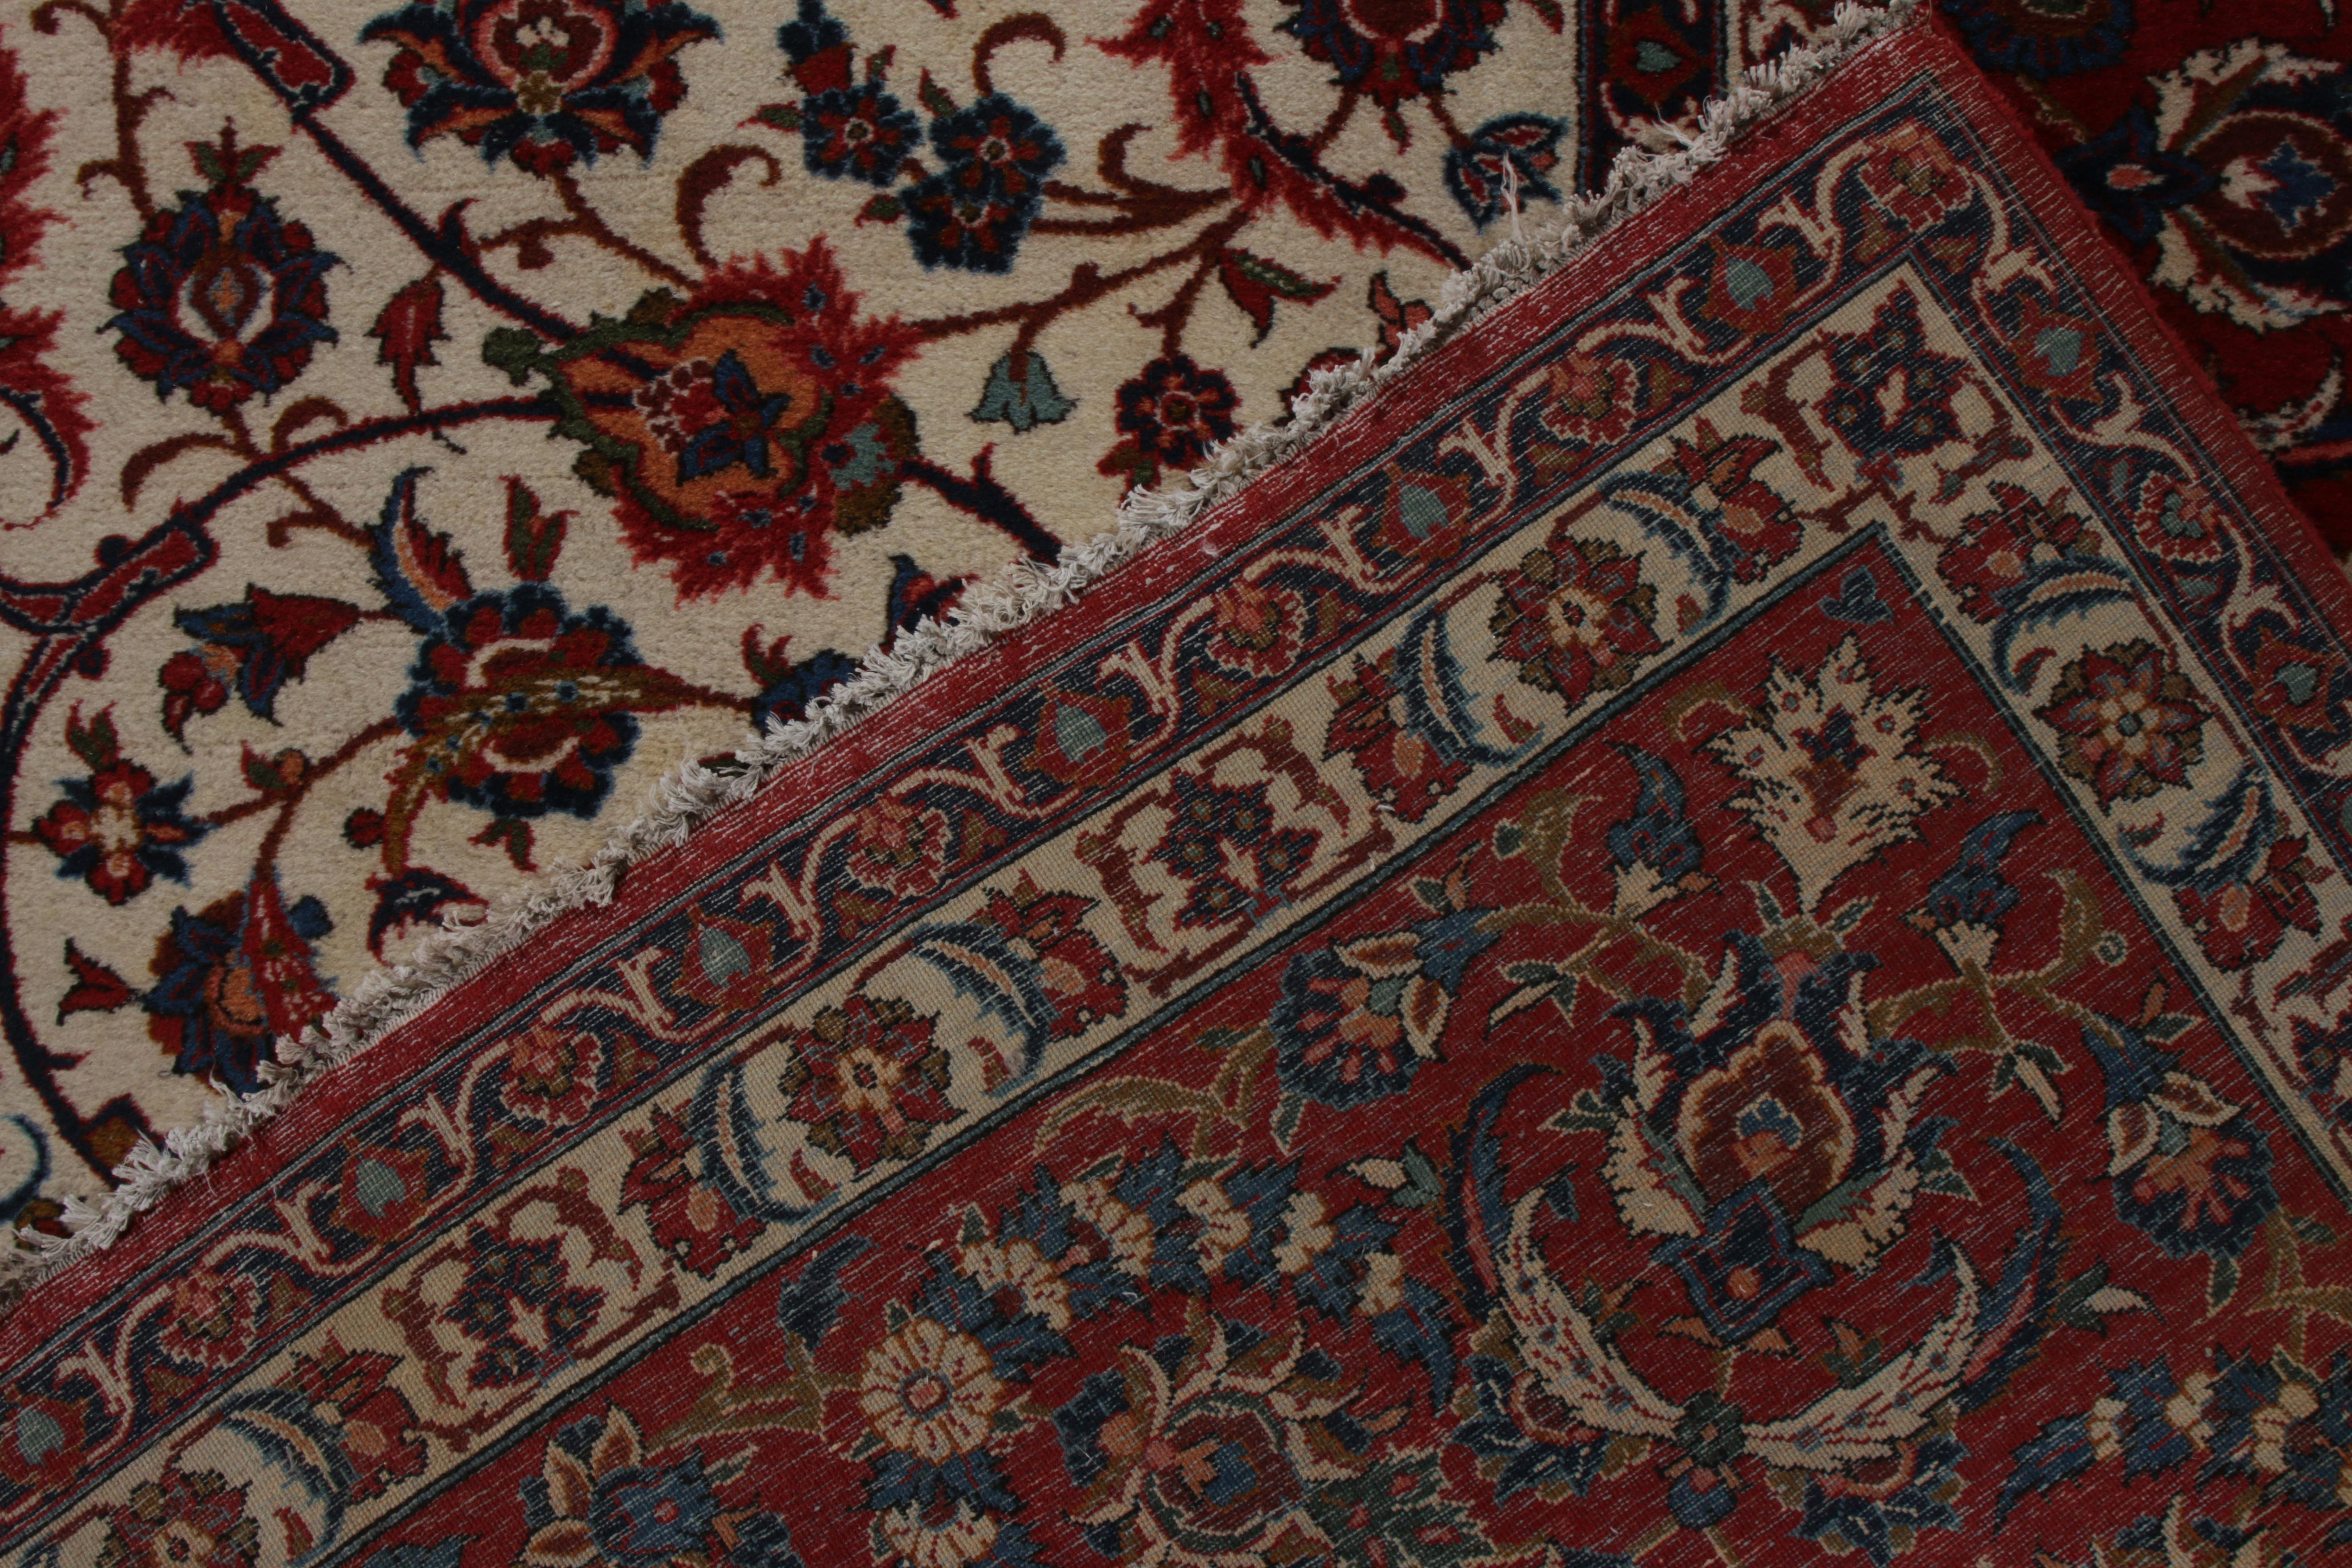 Mid-20th Century Hand-Knotted Vintage Isfahan Rug in All over Red, Blue, Beige Floral Pattern For Sale